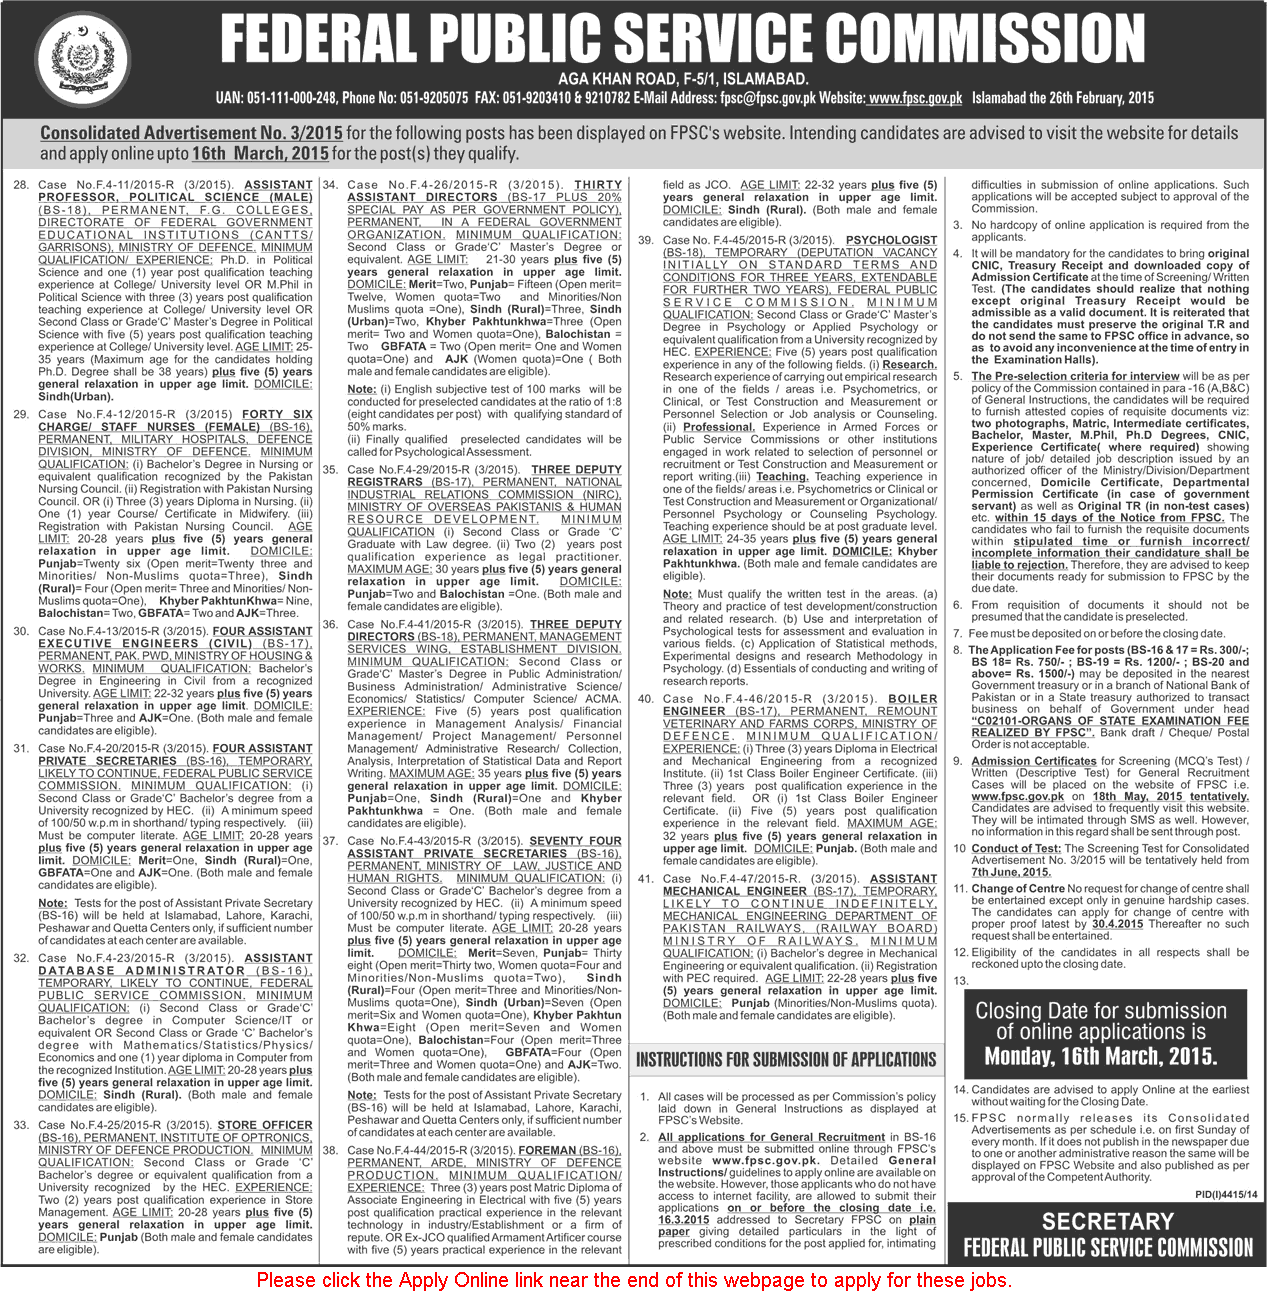 Federal Public Service Commission Jobs March 2015 Consolidated Advertisement No 3/2015 Apply Online 03/2015